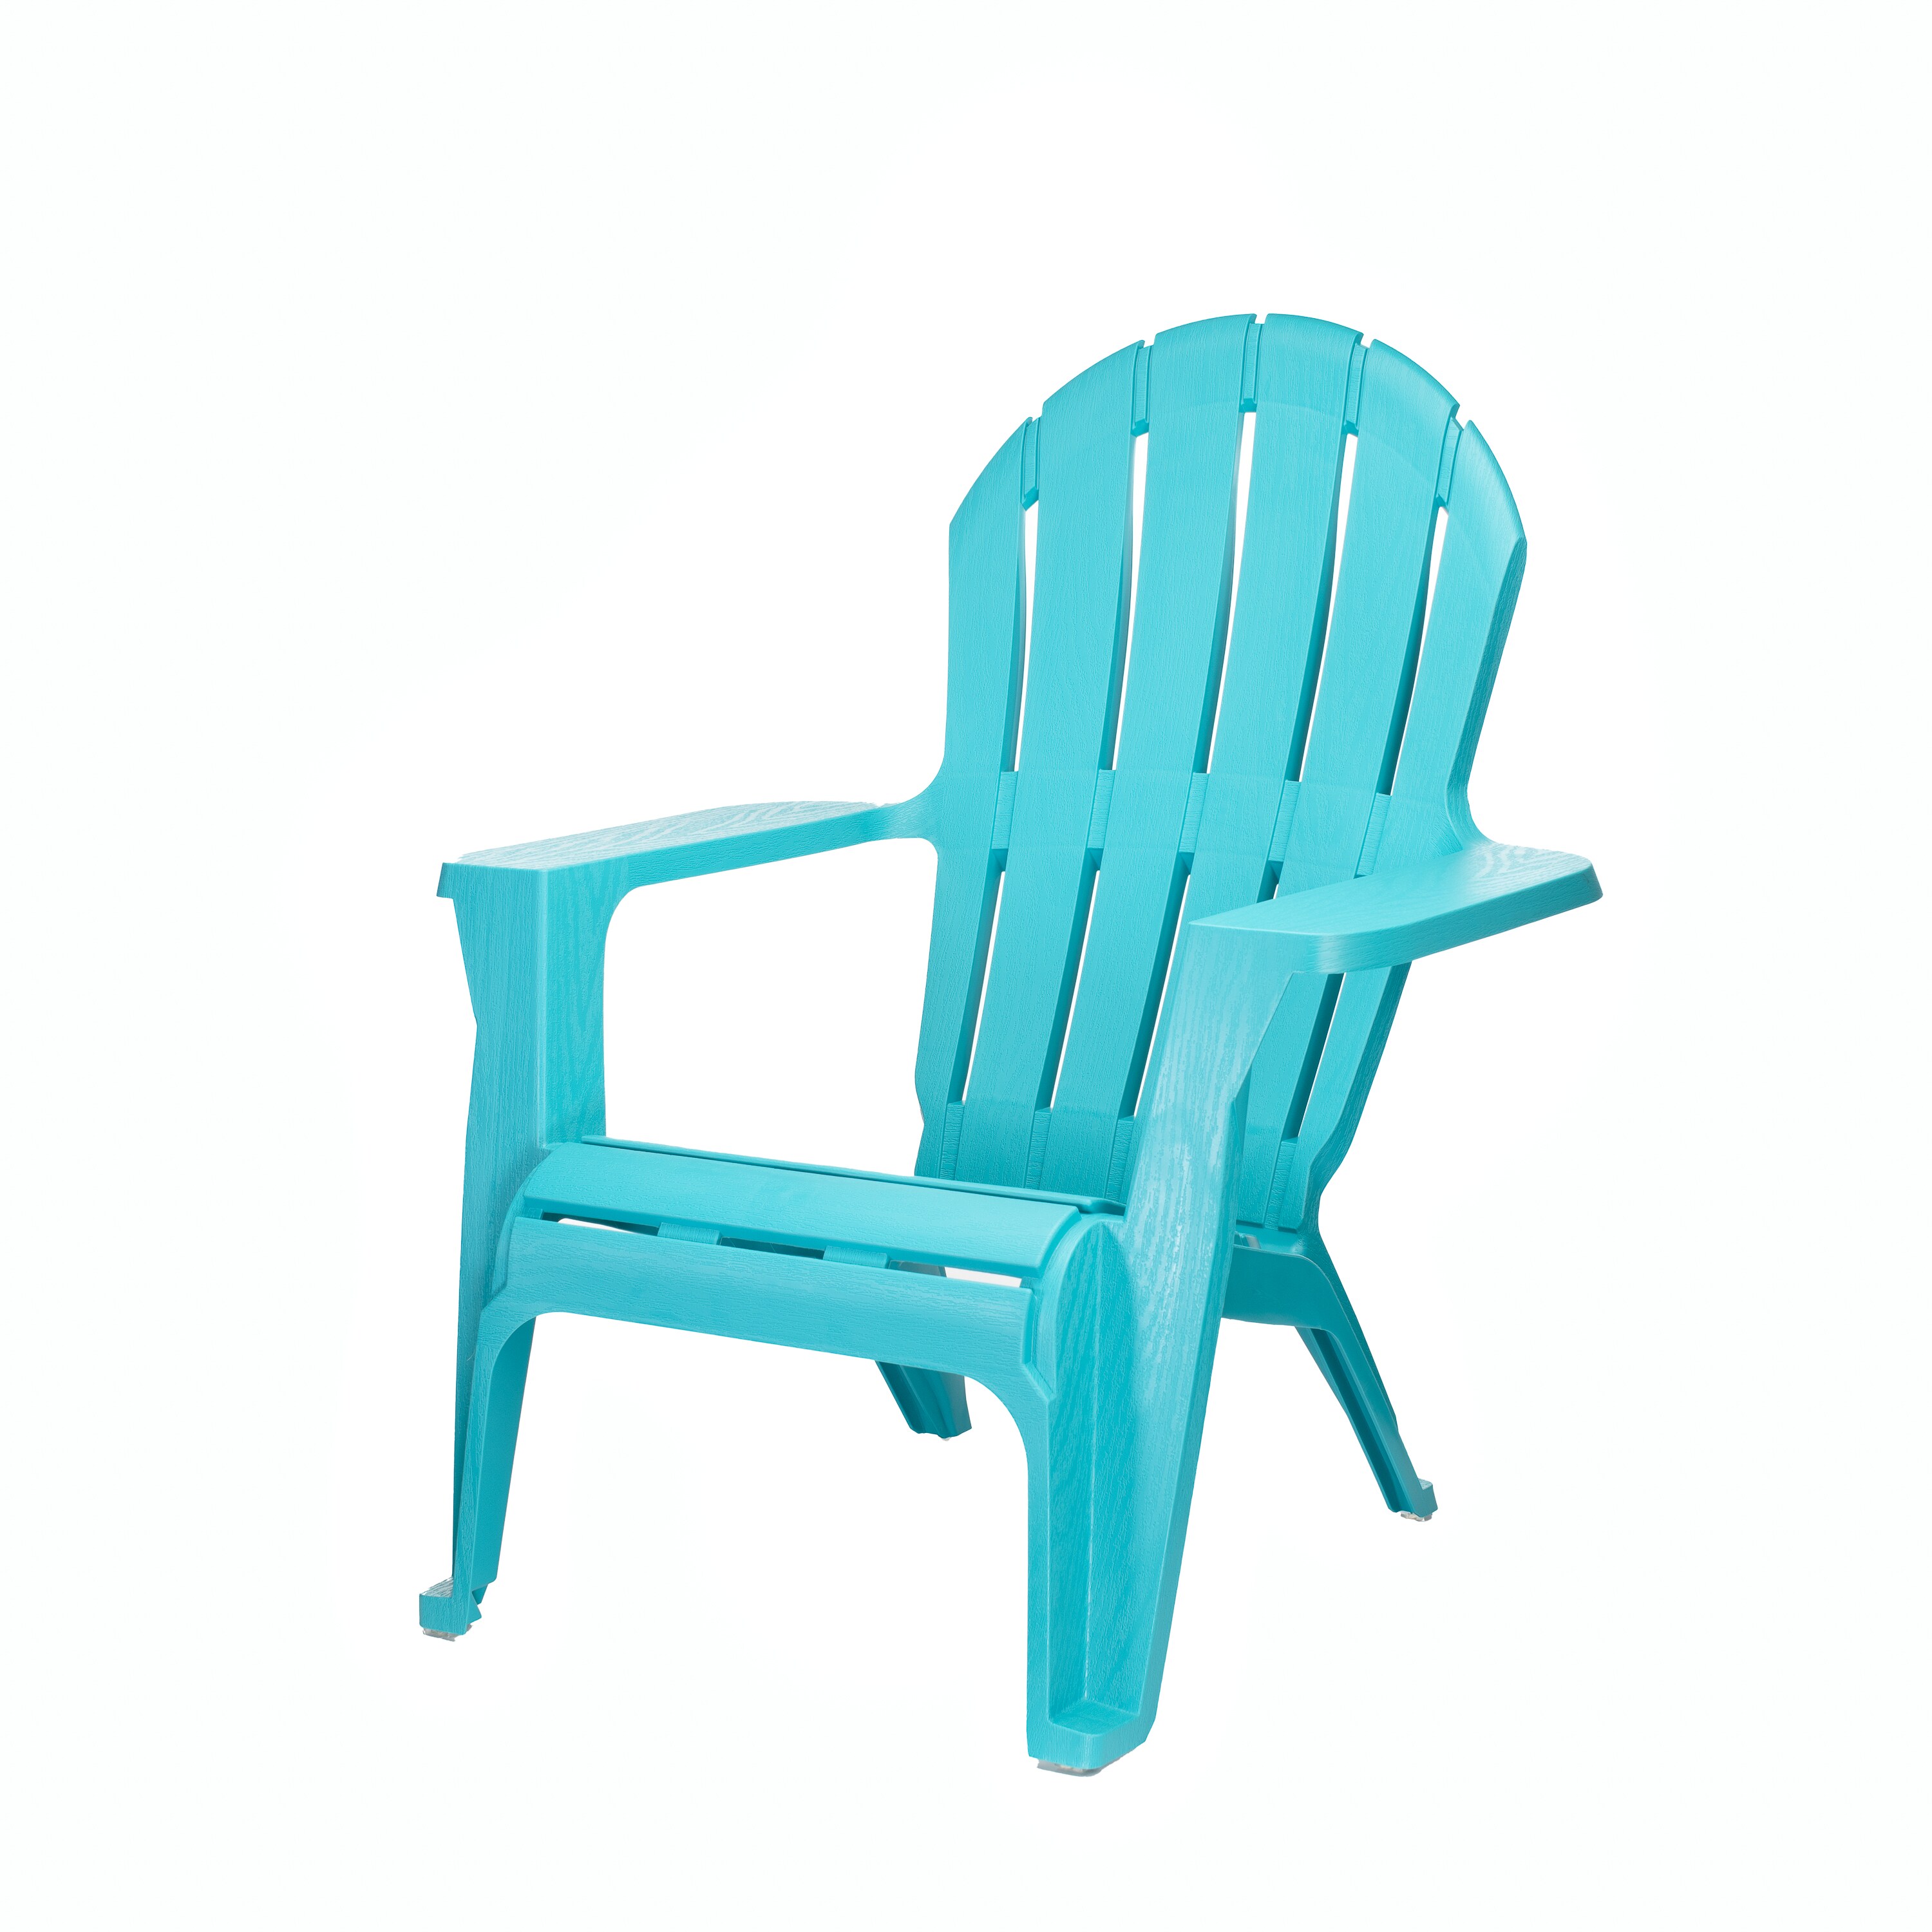 Teal Color Details about   Outdoor Keter Adirondack Chair 